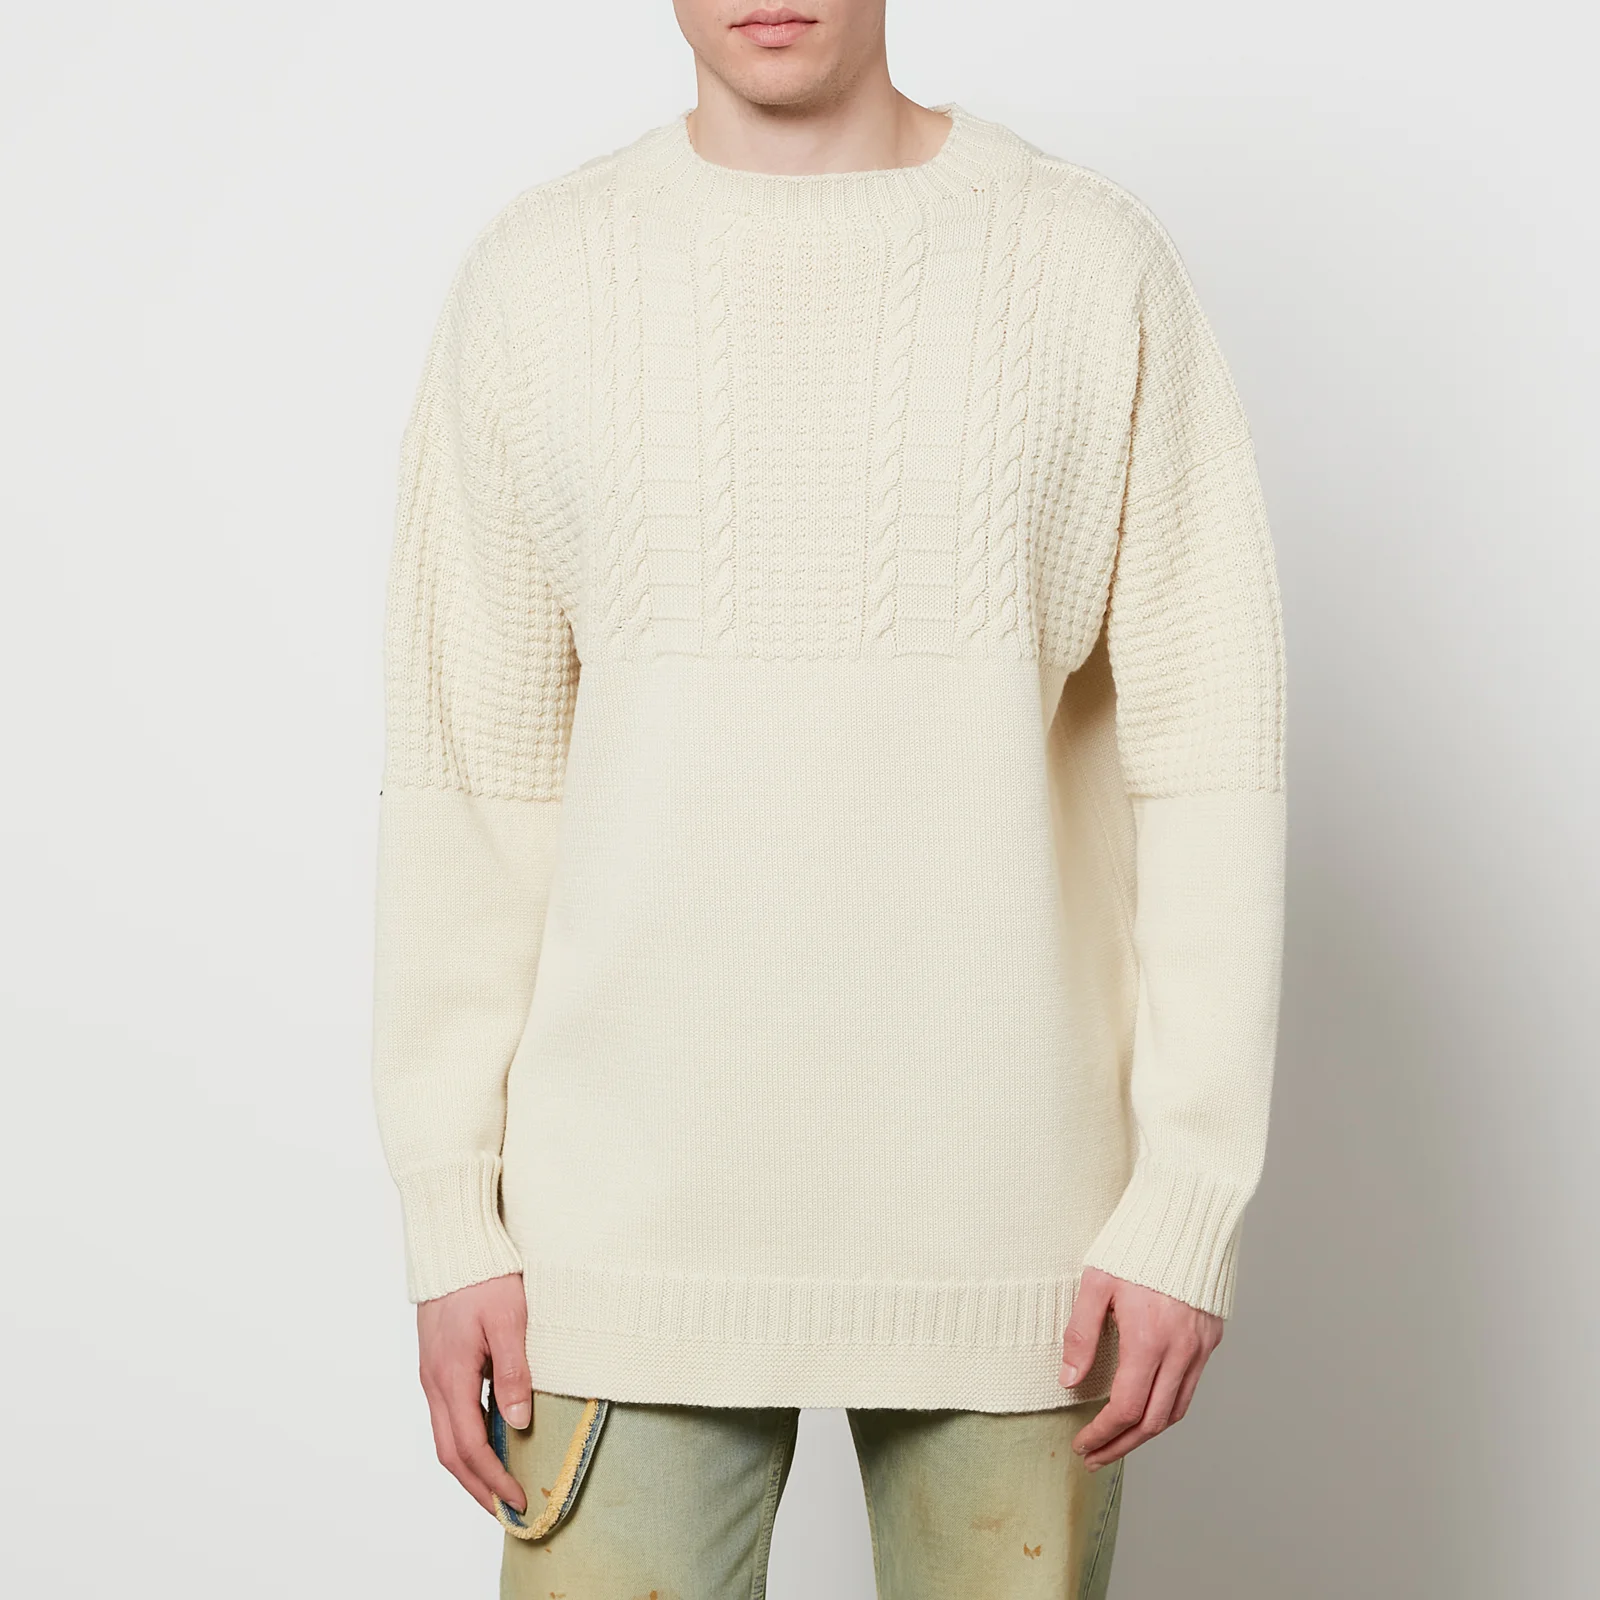 Maison Margiela Men's Cable Knitted Jumper - Off White Image 1